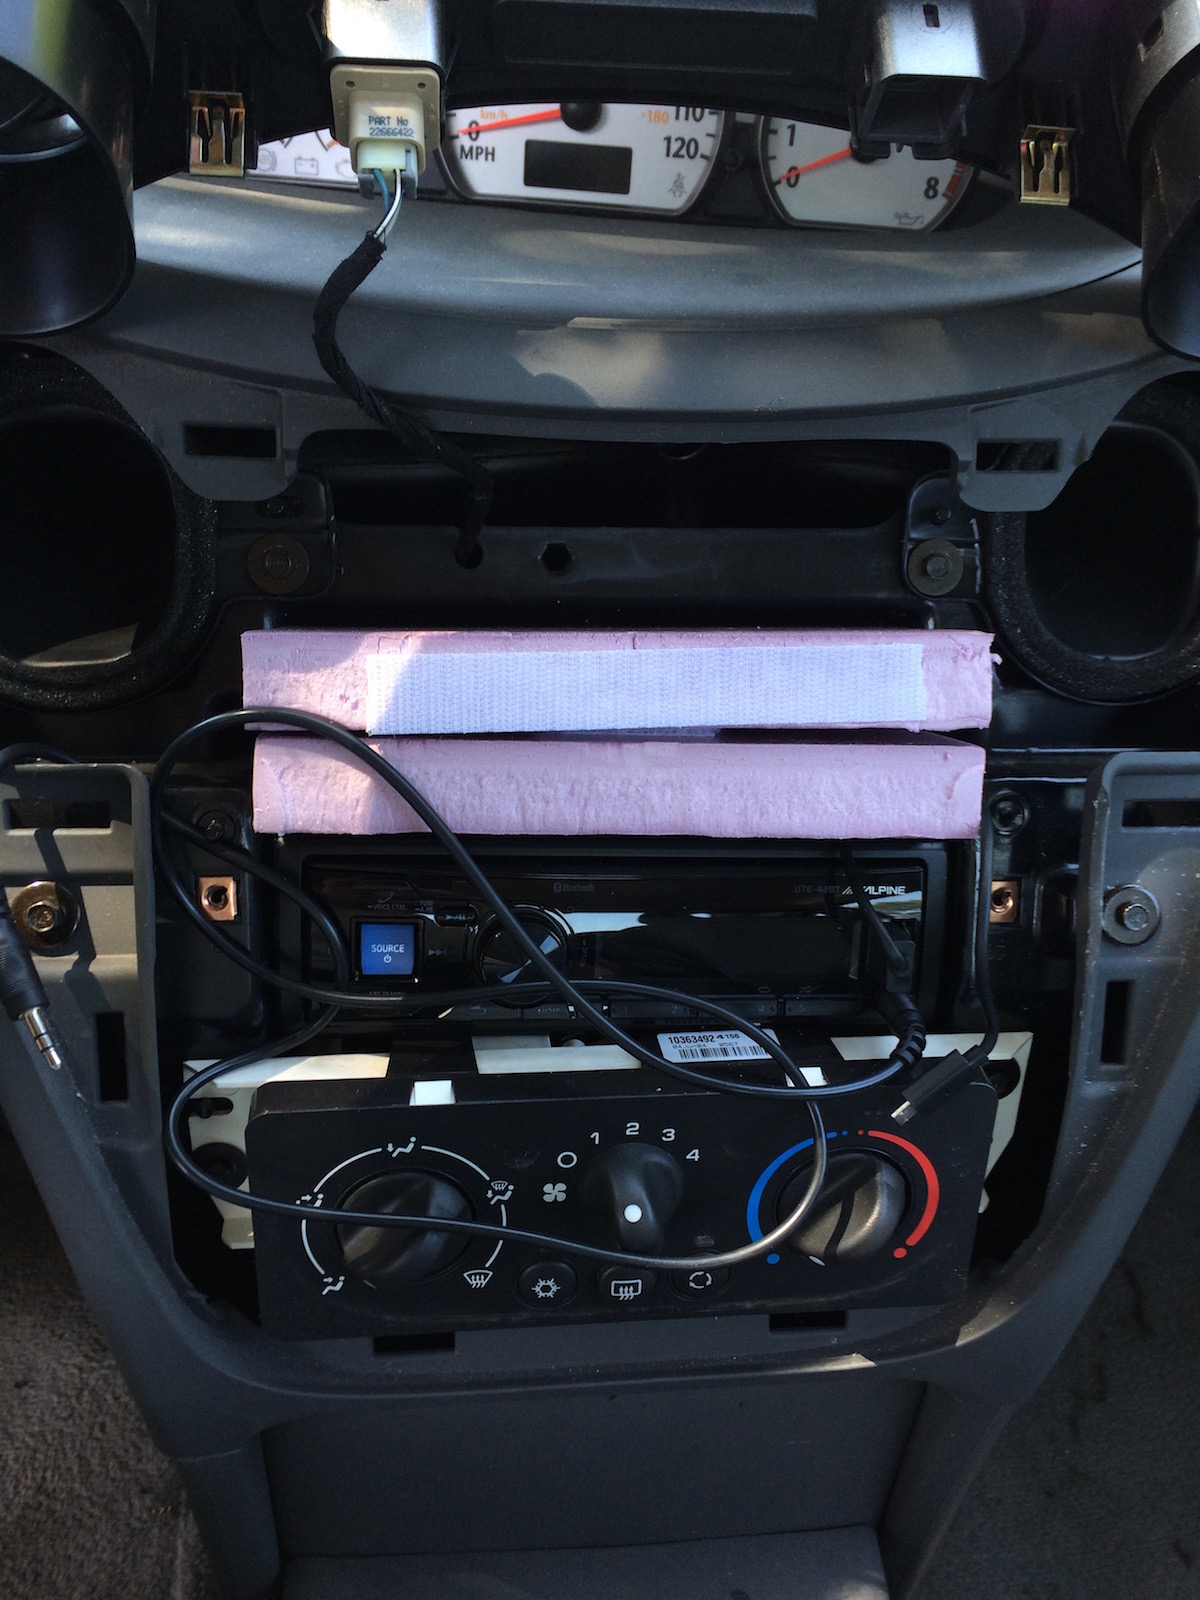 Foam boards, velcro and radio used to mount the Nexus 7 behind the dash